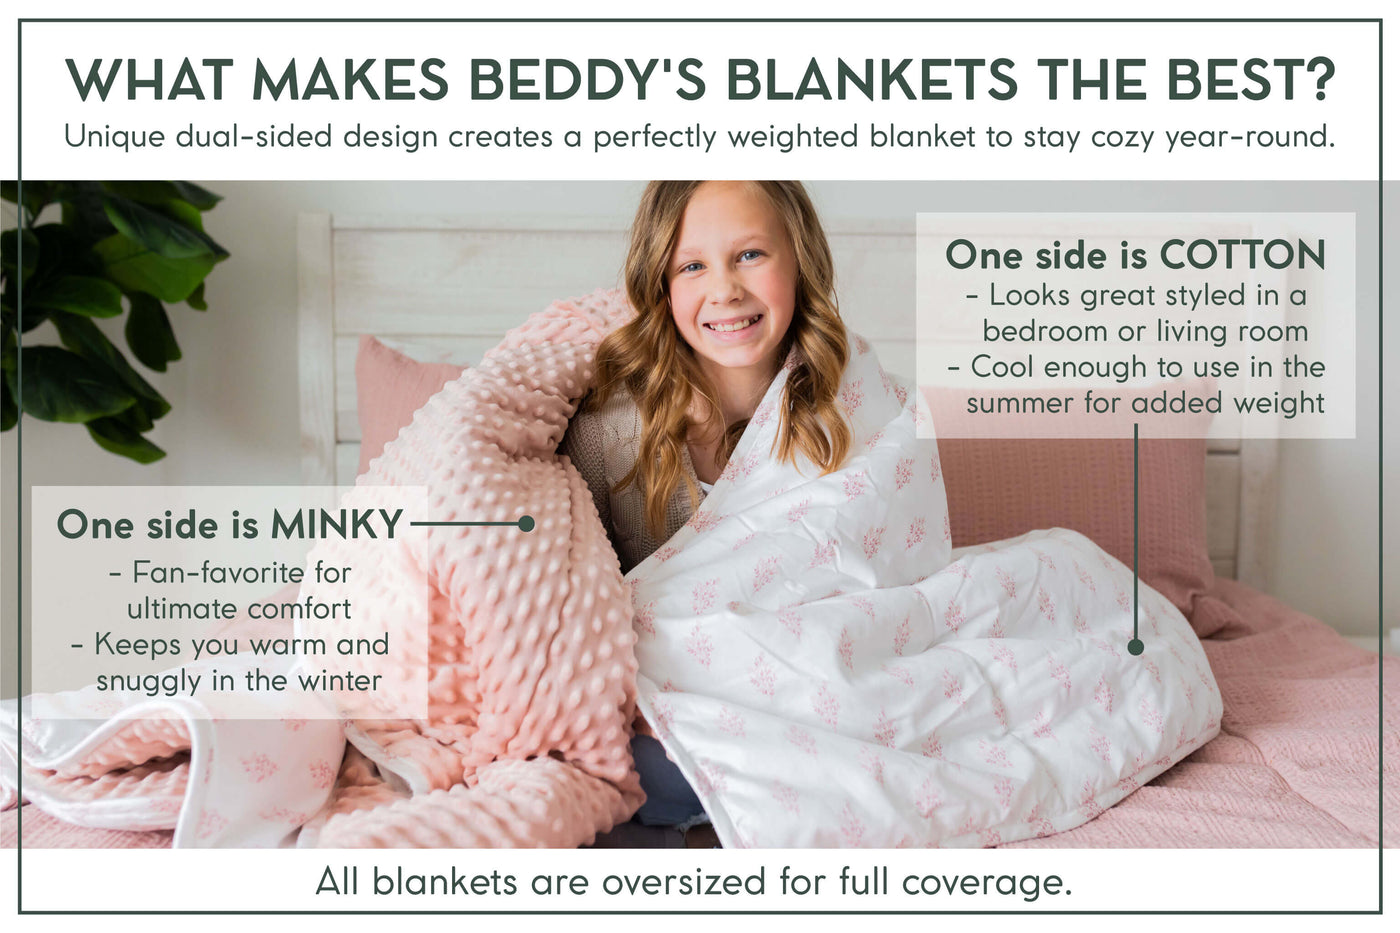 Graphic showing advantages of blanket with minky and cotton sides of blanket